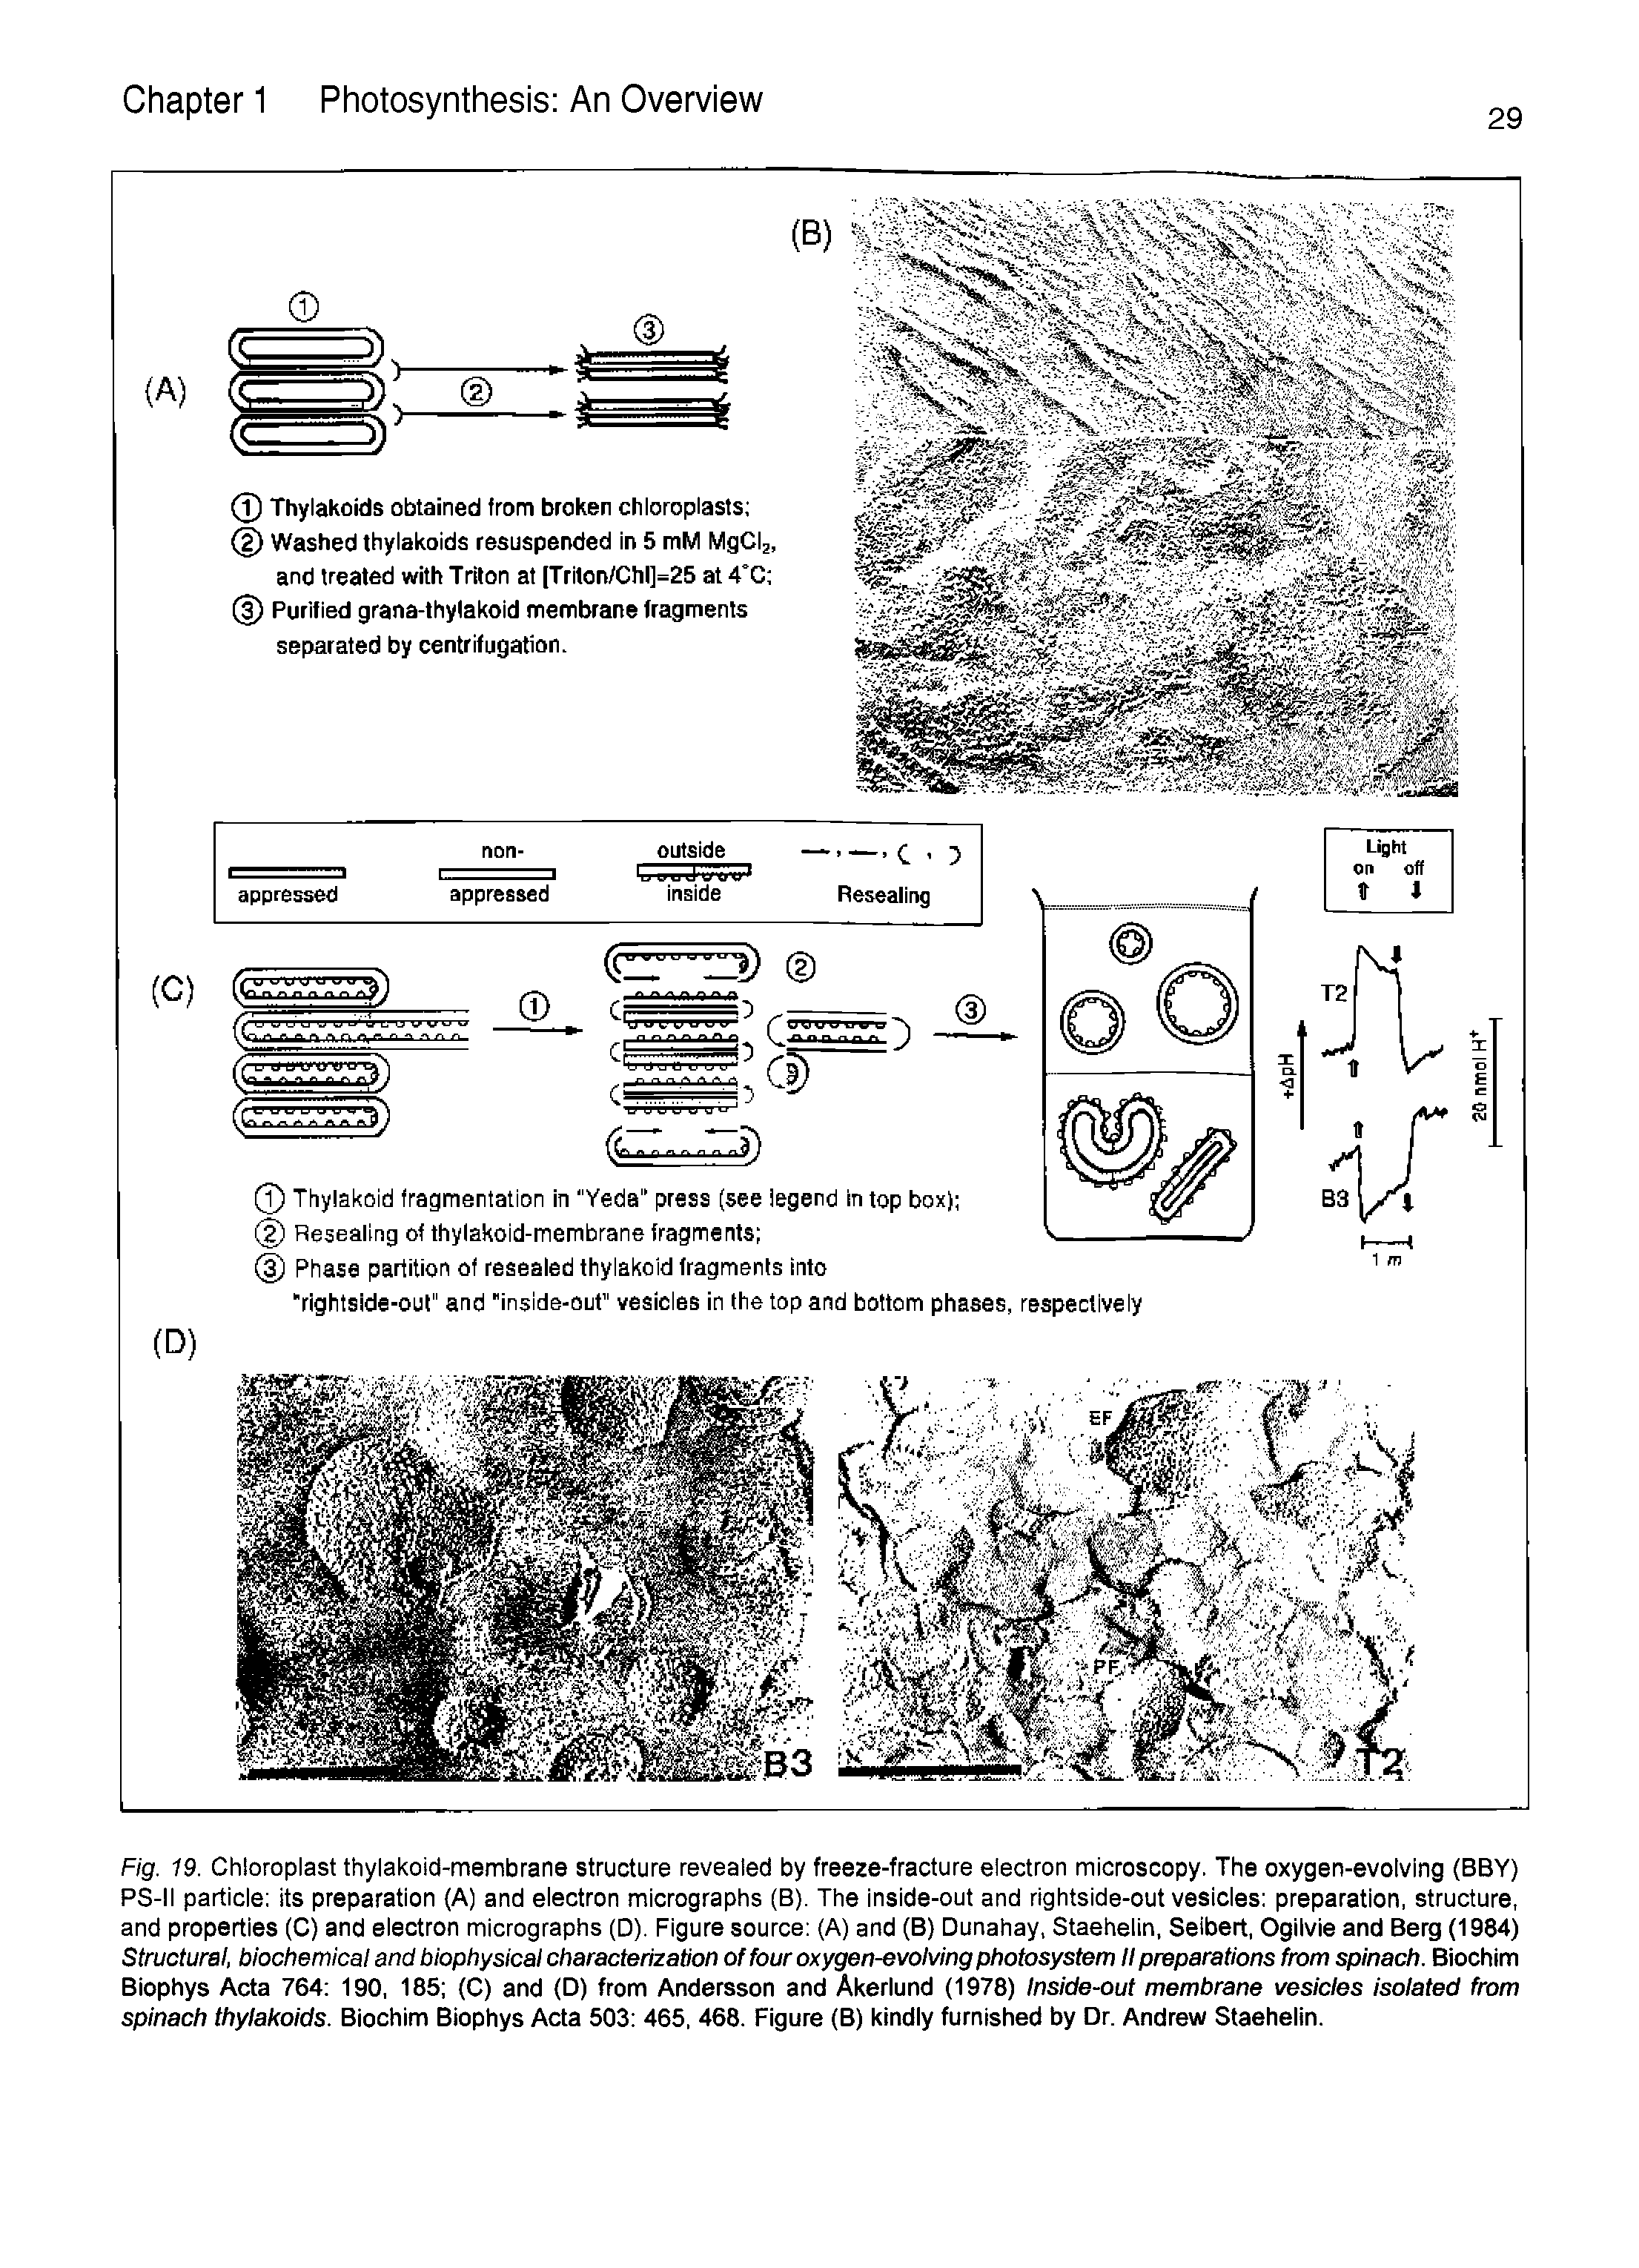 Fig. 19. Chloroplast thylakoid-membrane structure revealed by freeze-fracture electron microscopy. The oxygen-evolving (BBY) PS-II particle its preparation (A) and electron micrographs (B). The inside-out and rightside-out vesicles preparation, structure, and properties (C) and electron micrographs (D). Figure source (A) and (B) Dunahay, Staehelin, Seibert, Ogilvie and Berg (1984) Structural, biochemical and biophysical characterization of four oxygen-evolving photosystem II preparations from spinach. Biochim Biophys Acta 764 190, 185 (C) and (D) from Andersson and Akerlund (1978) Inside-out membrane vesicles isolated from spinach thylakoids. Biochim Biophys Acta 503 465, 468. Figure (B) kindly furnished by Dr. Andrew Staehelin.